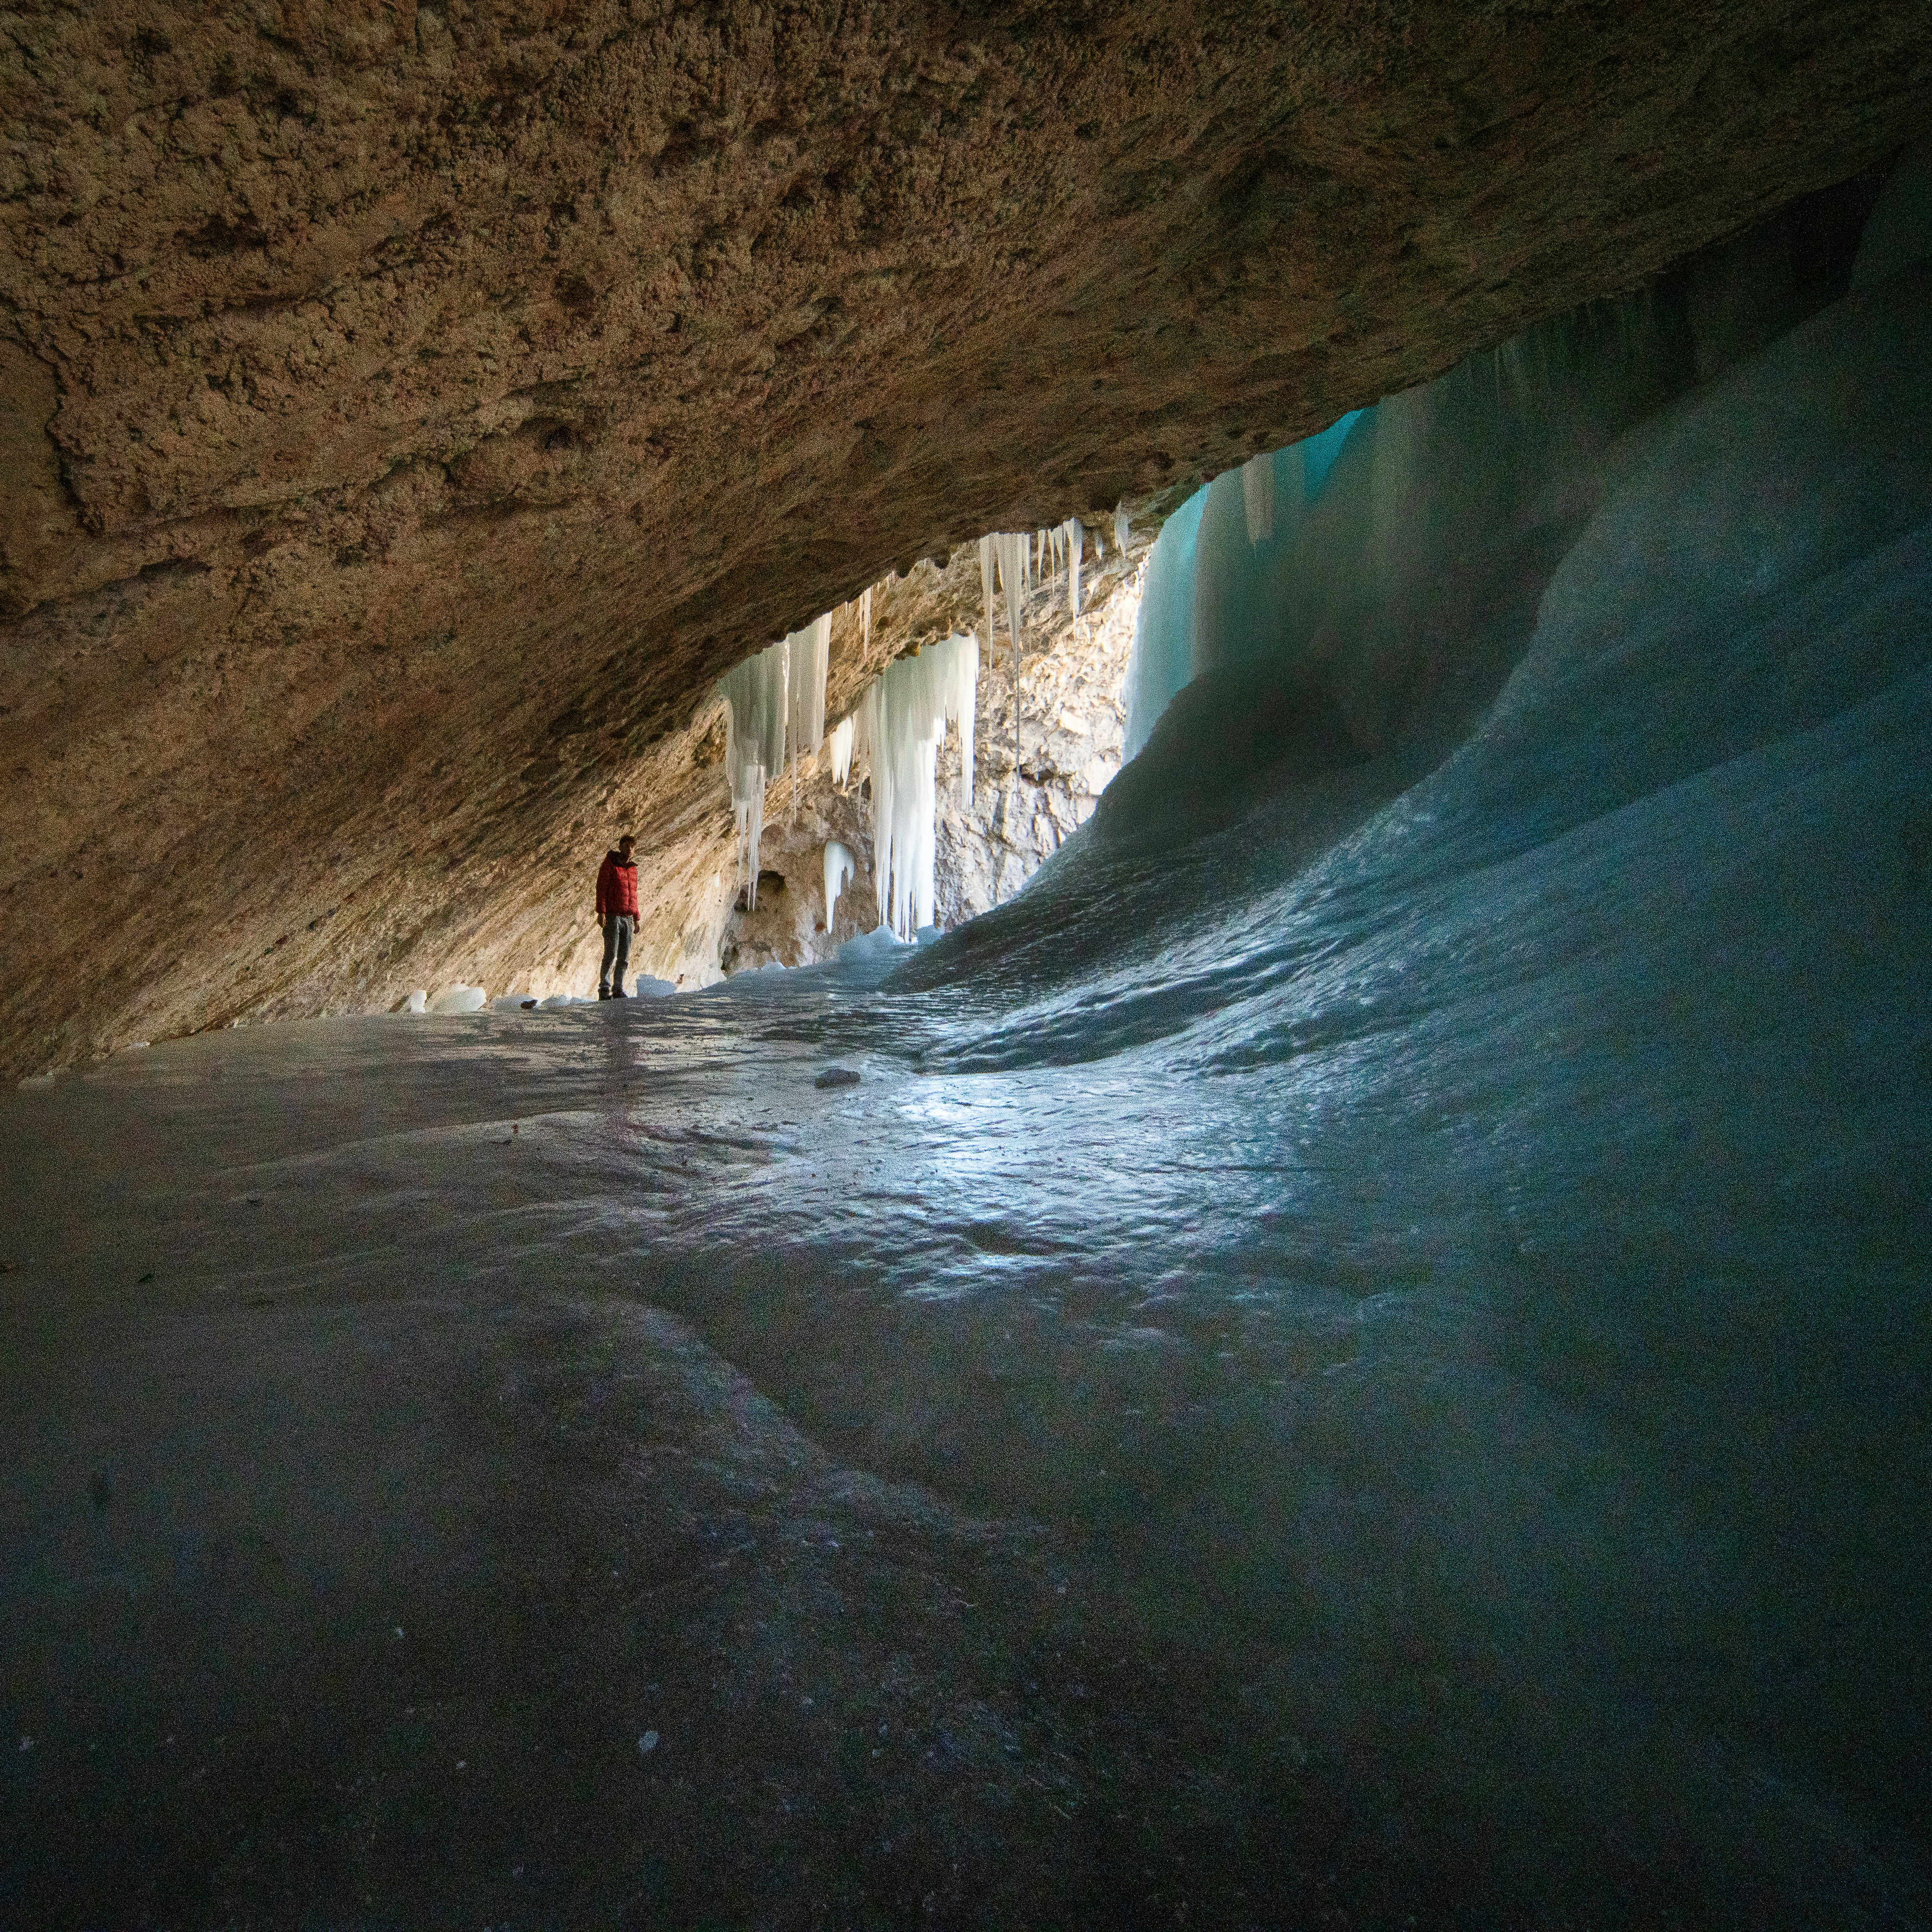 person in white shirt walking inside cave